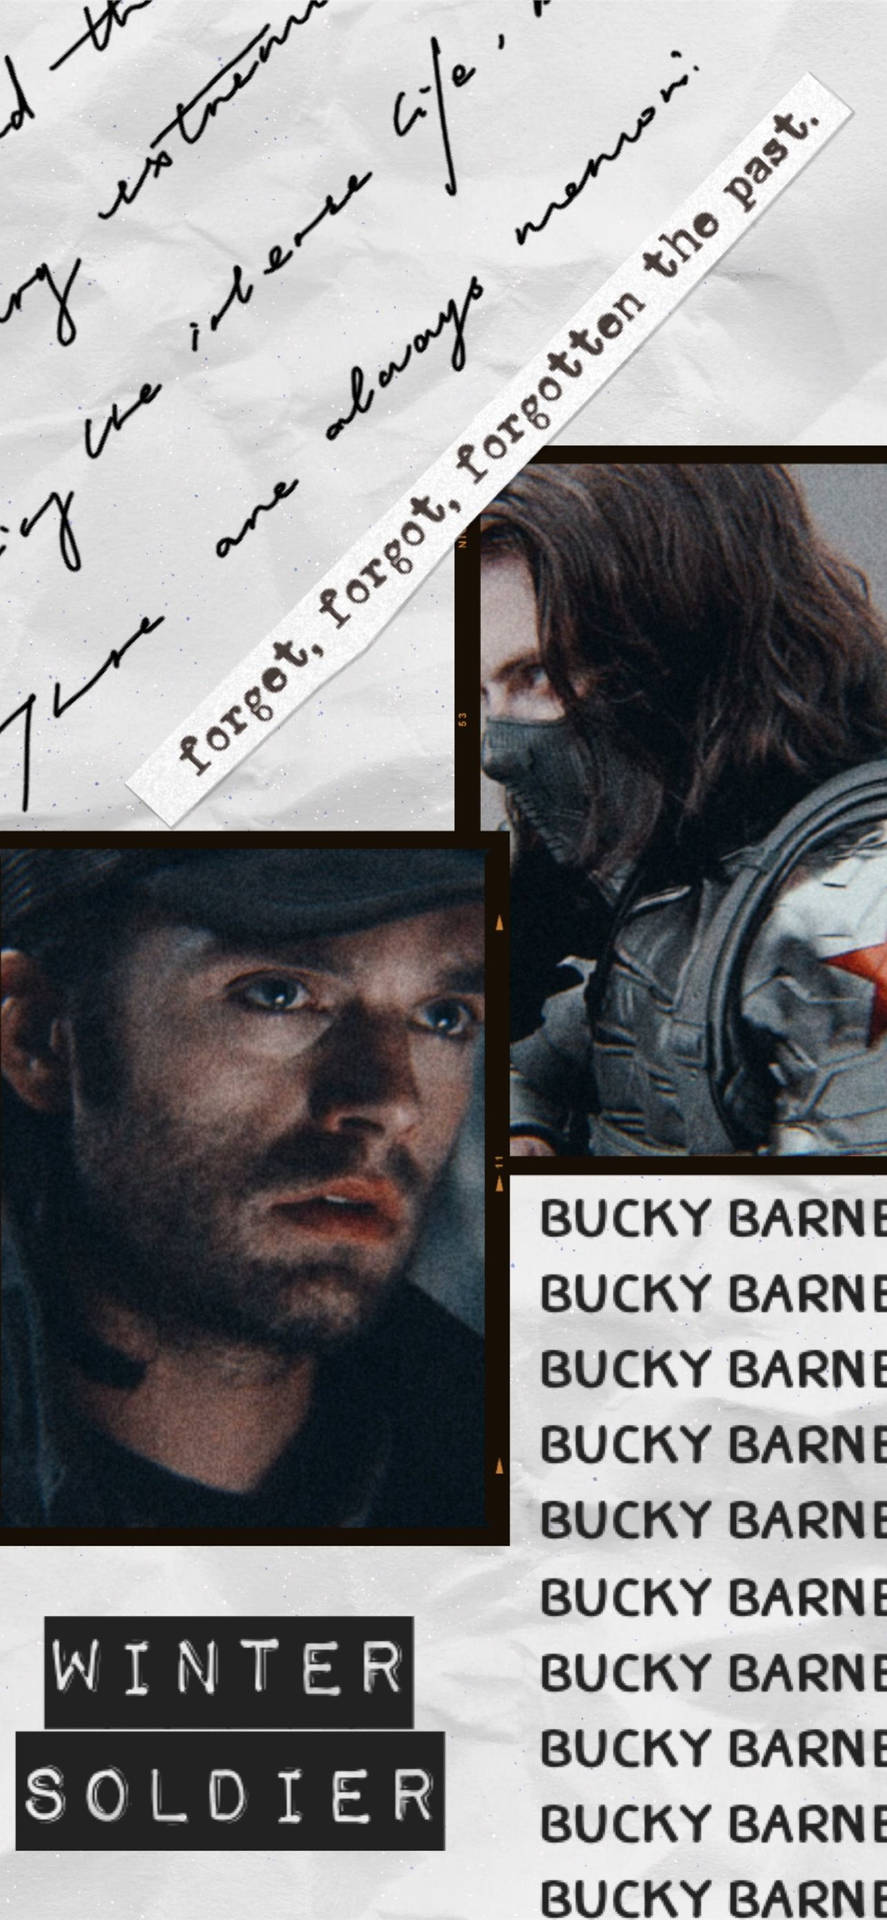 Buckybarnes Could Be Translated Into German As 